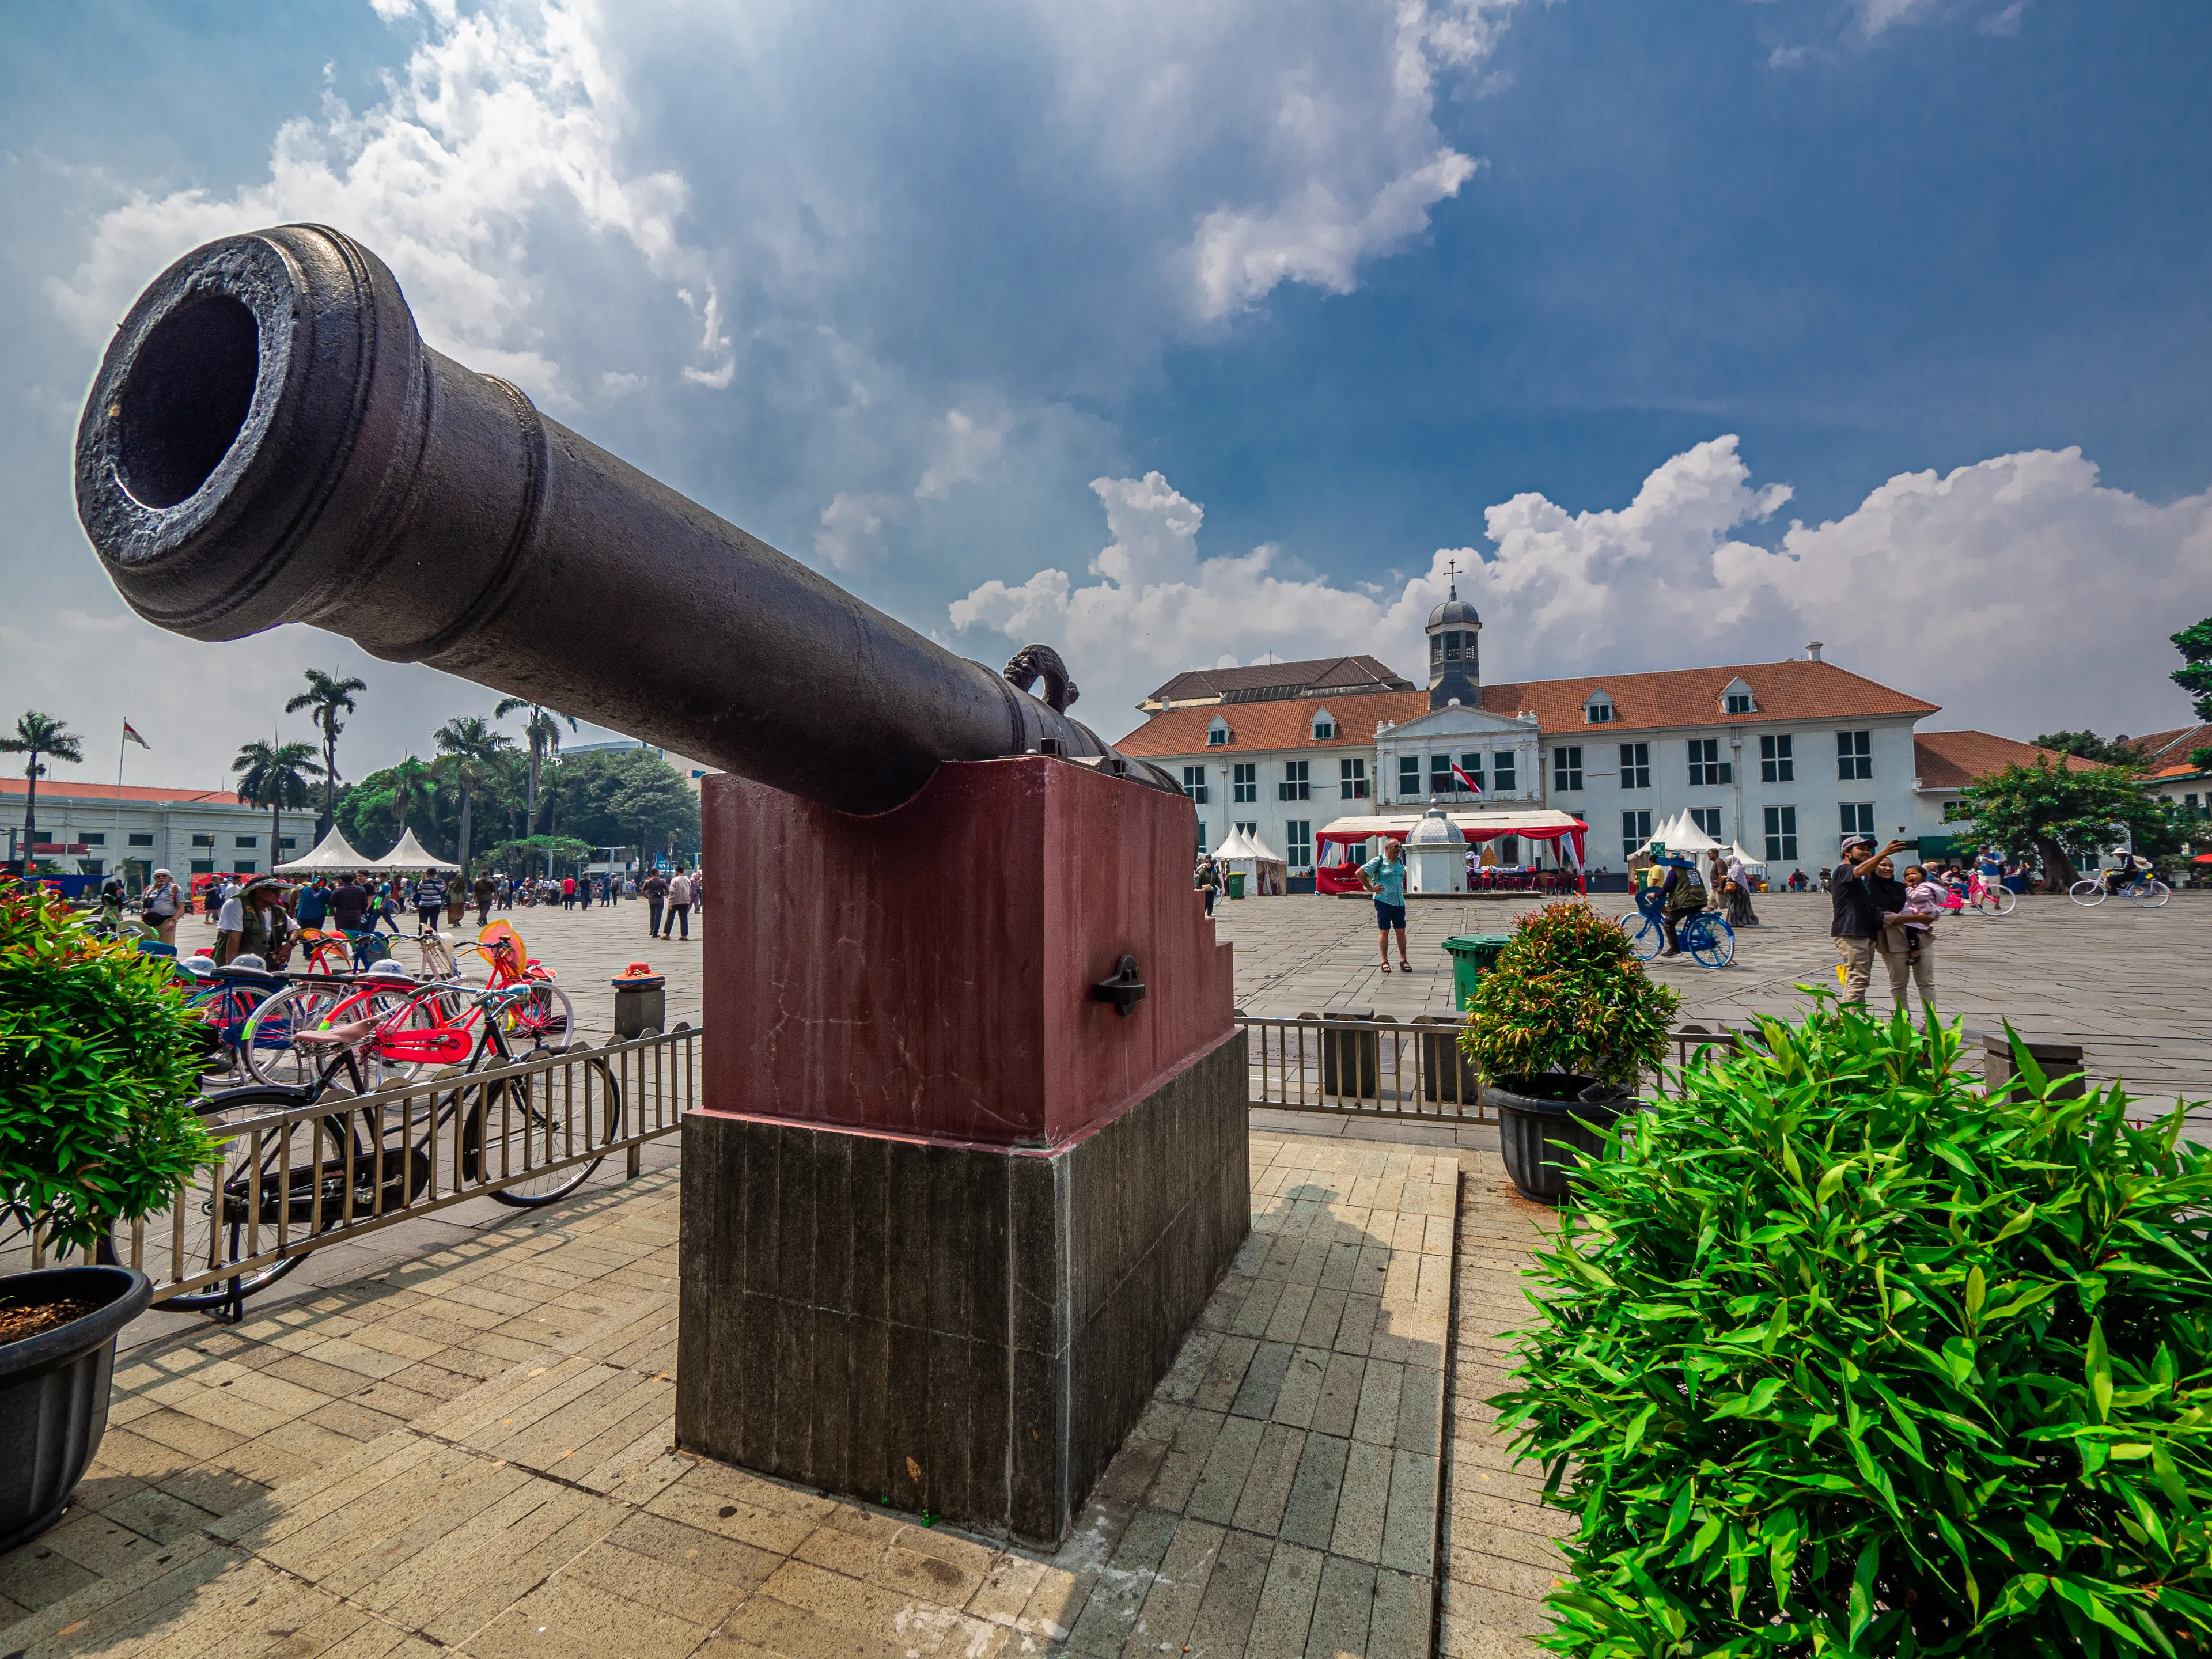 The Si Jagur cannon is an ancient cannon left by the Portuguese in the old city